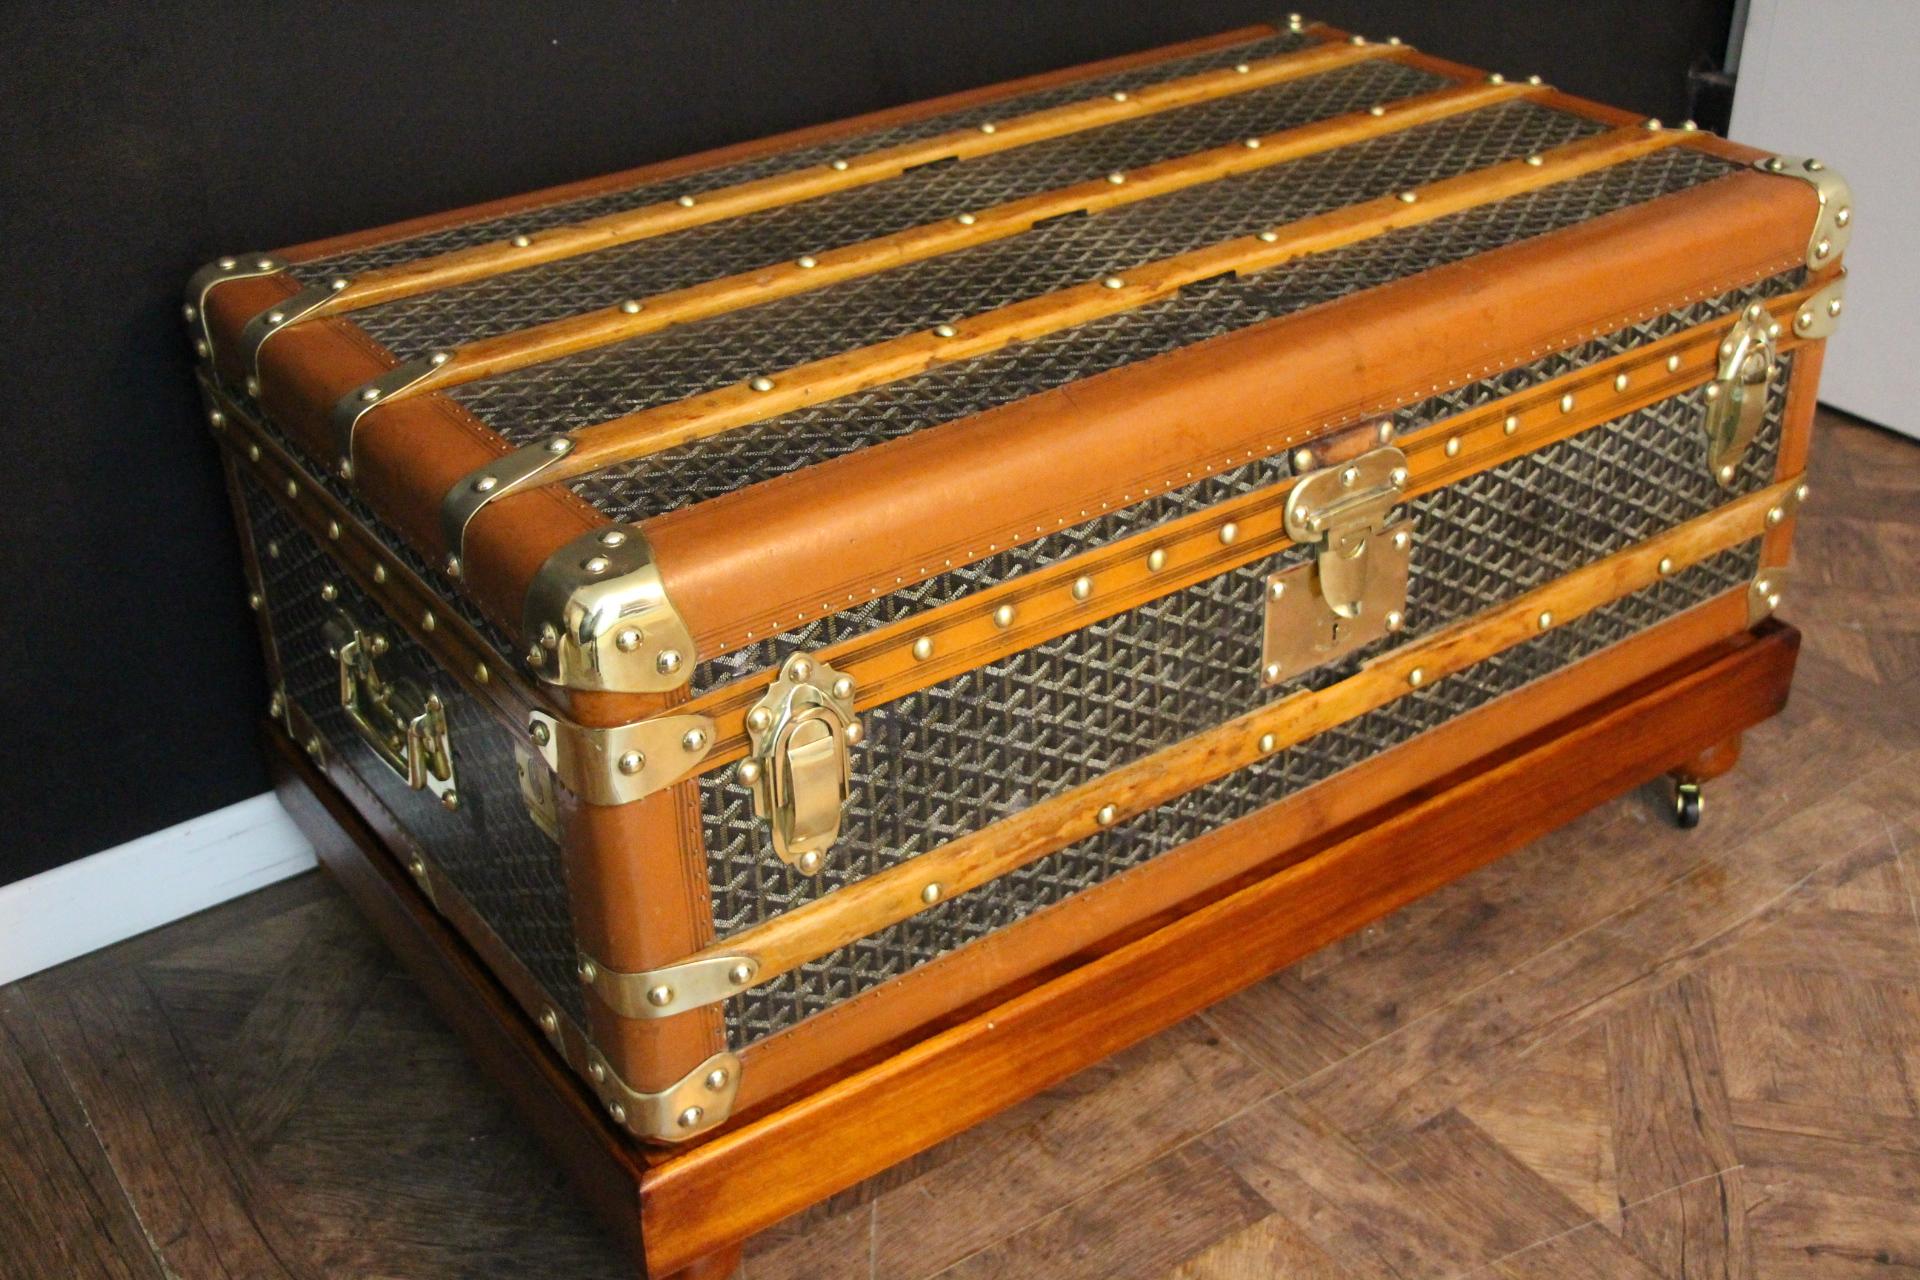 This superb Goyard steamer trunk features the very sought after chevrons canvas as well as all solid brass fittings: Goyard marked side handles and locks. Brass studs. It also has its brass Goyard plaques on each side. This trunk has many wood slats